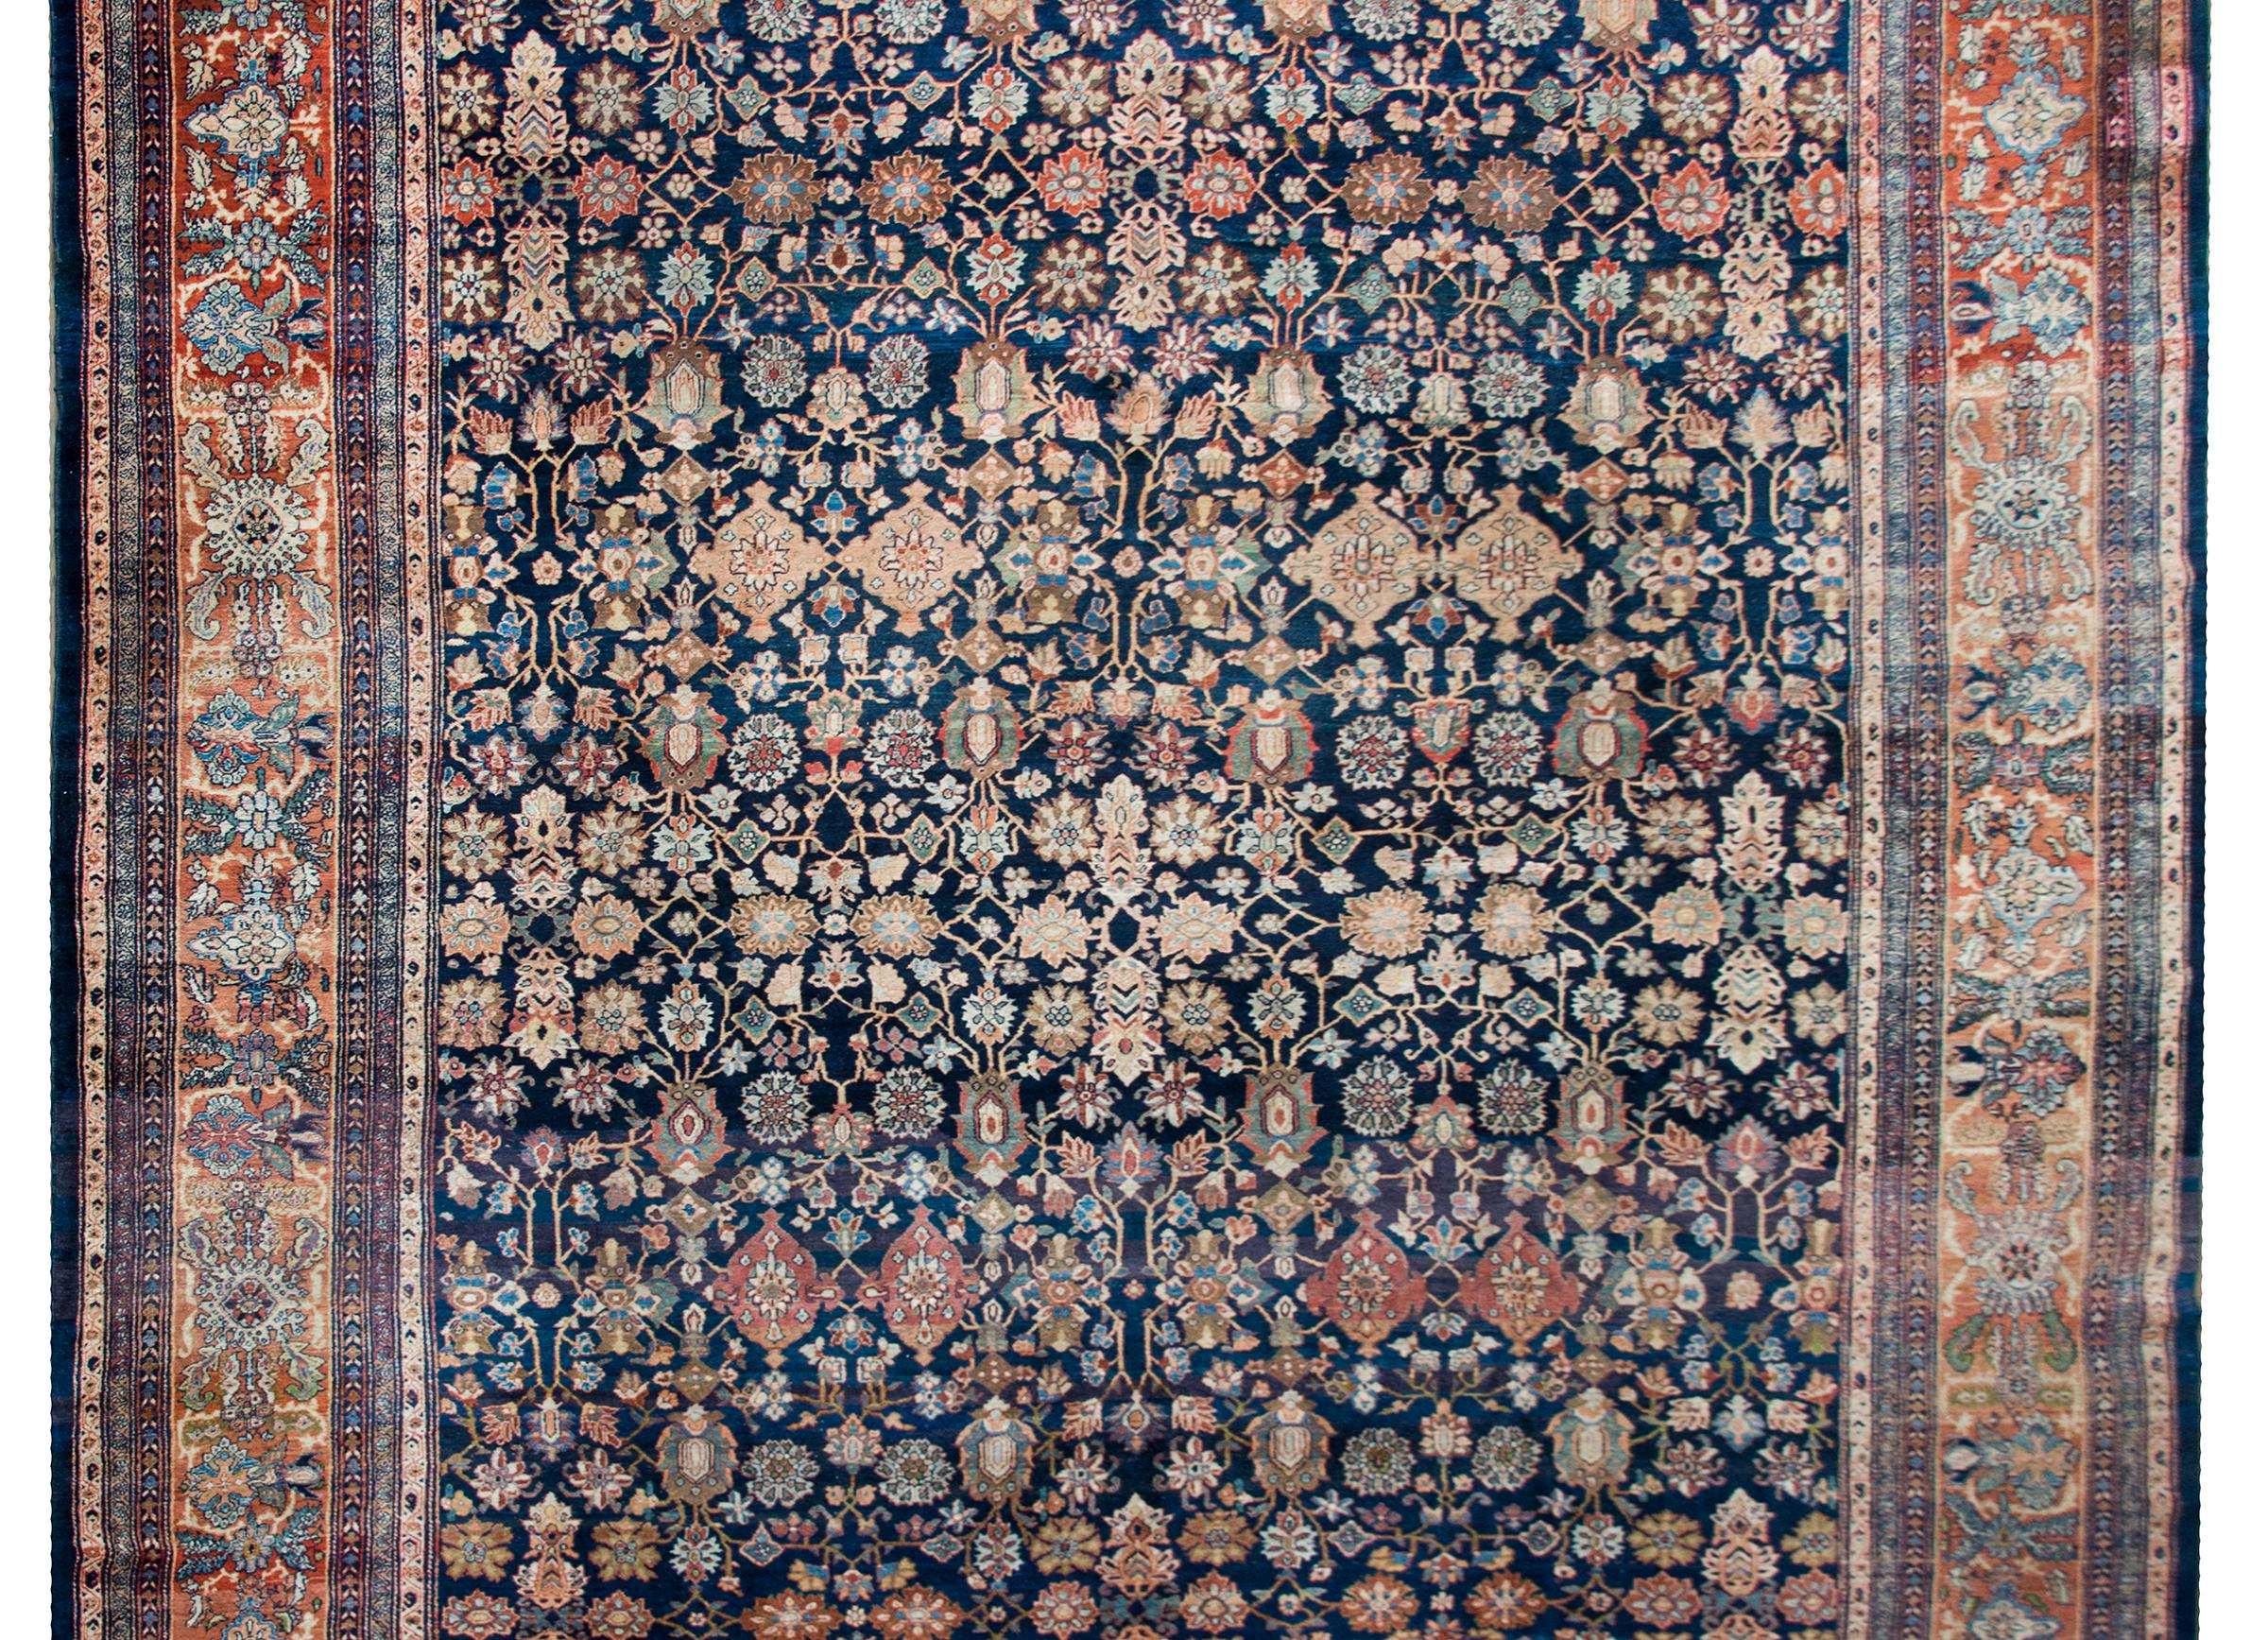 A remarkable early 20th century Persian Sarouk Farahan rug the most wonderful all-over repeated pattern woven with myriad stylized flowers and scrolling vines, and all woven in light and dark indigo, cream, coral, green, and white wool. The border